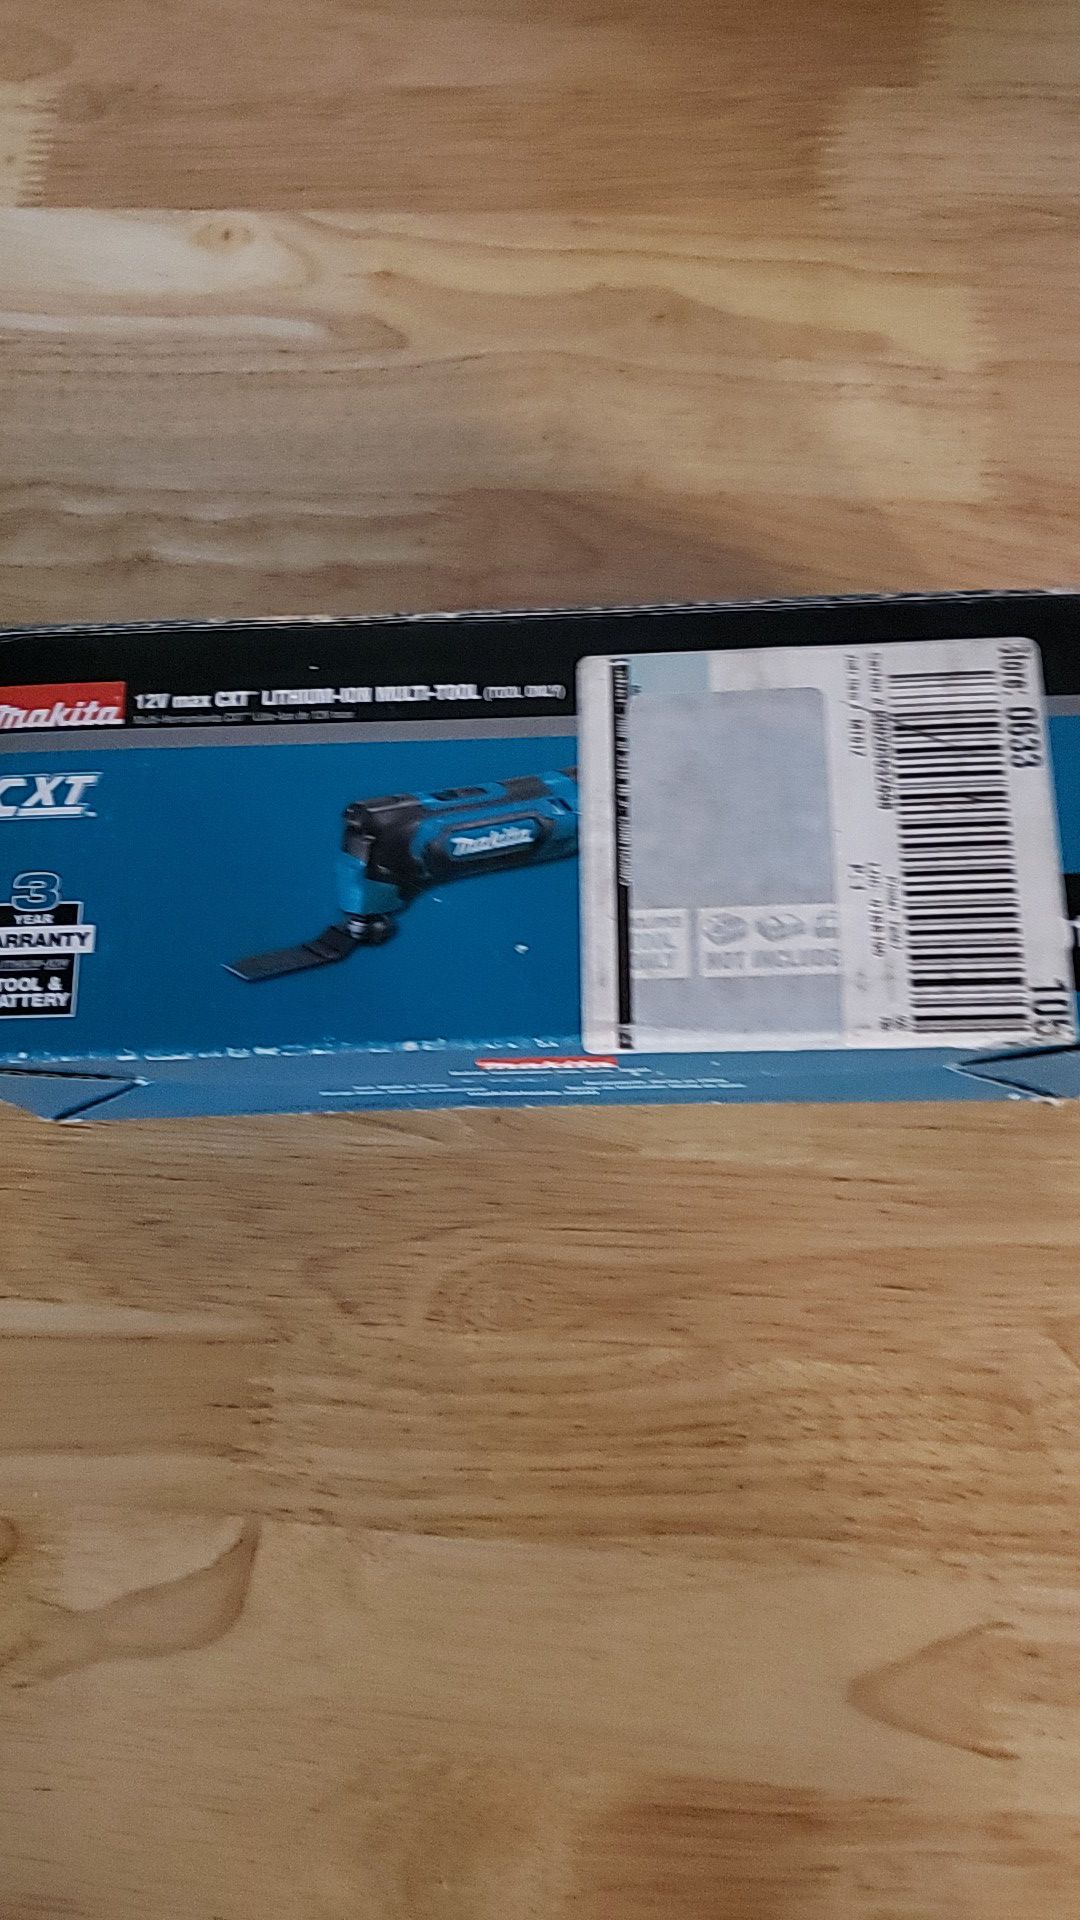 Brand new. 12 volt Multi-tool only